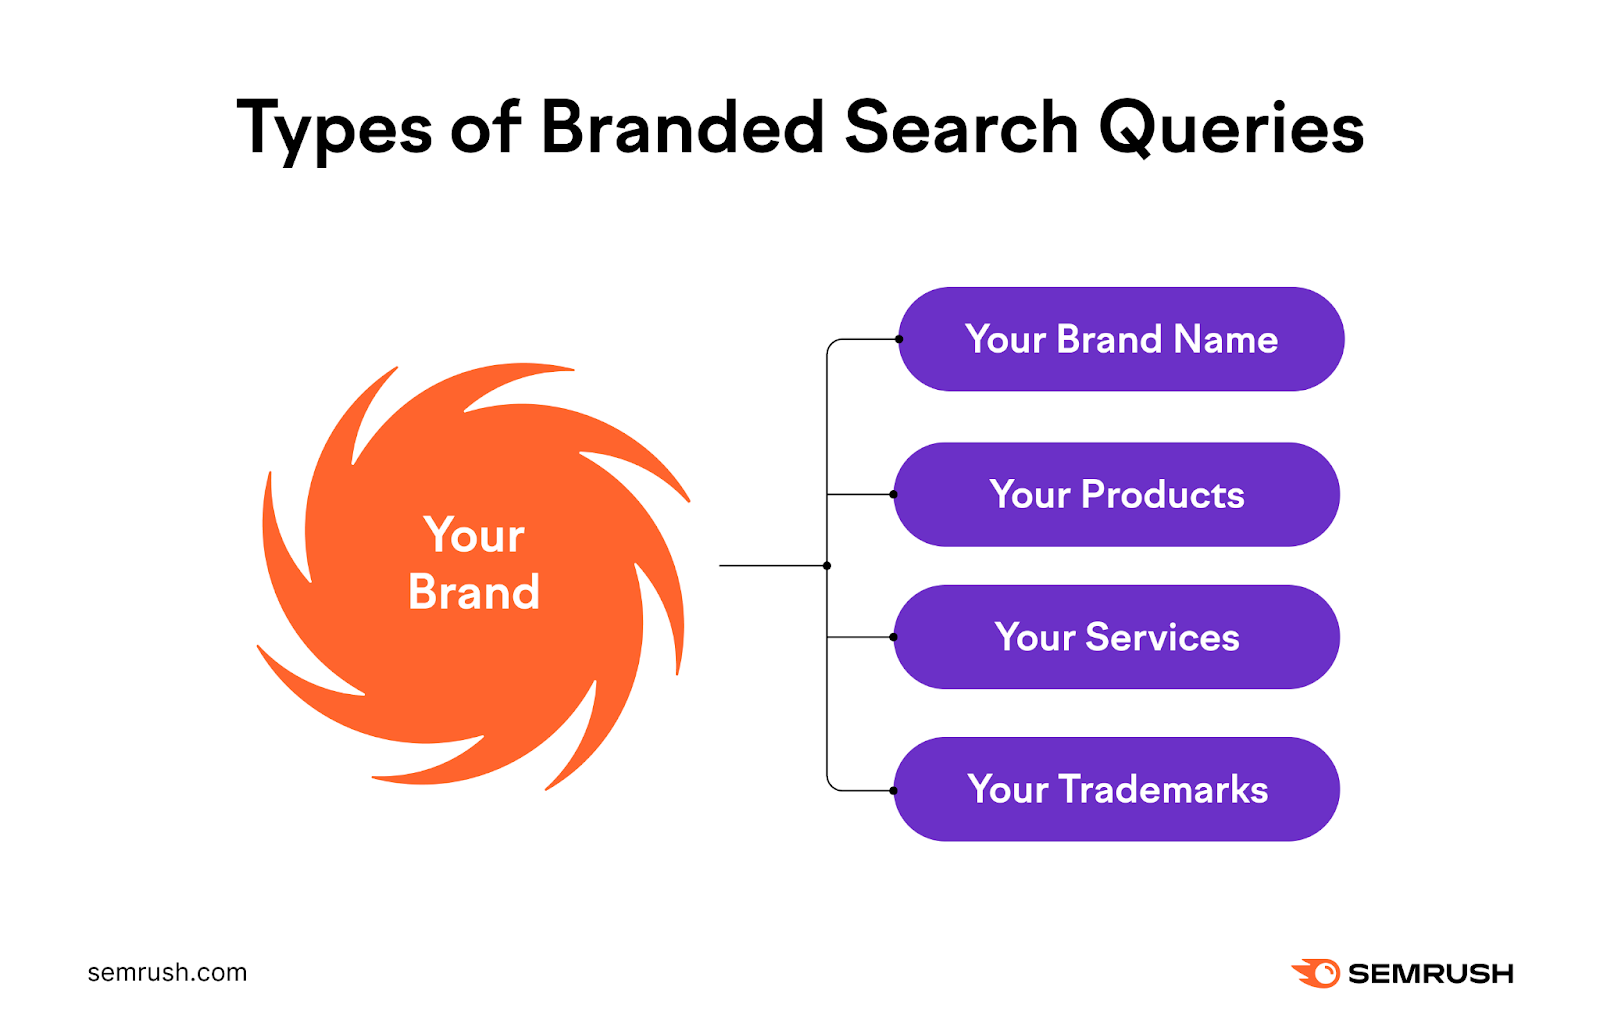 Semrush infographic listing different types of branded search queries